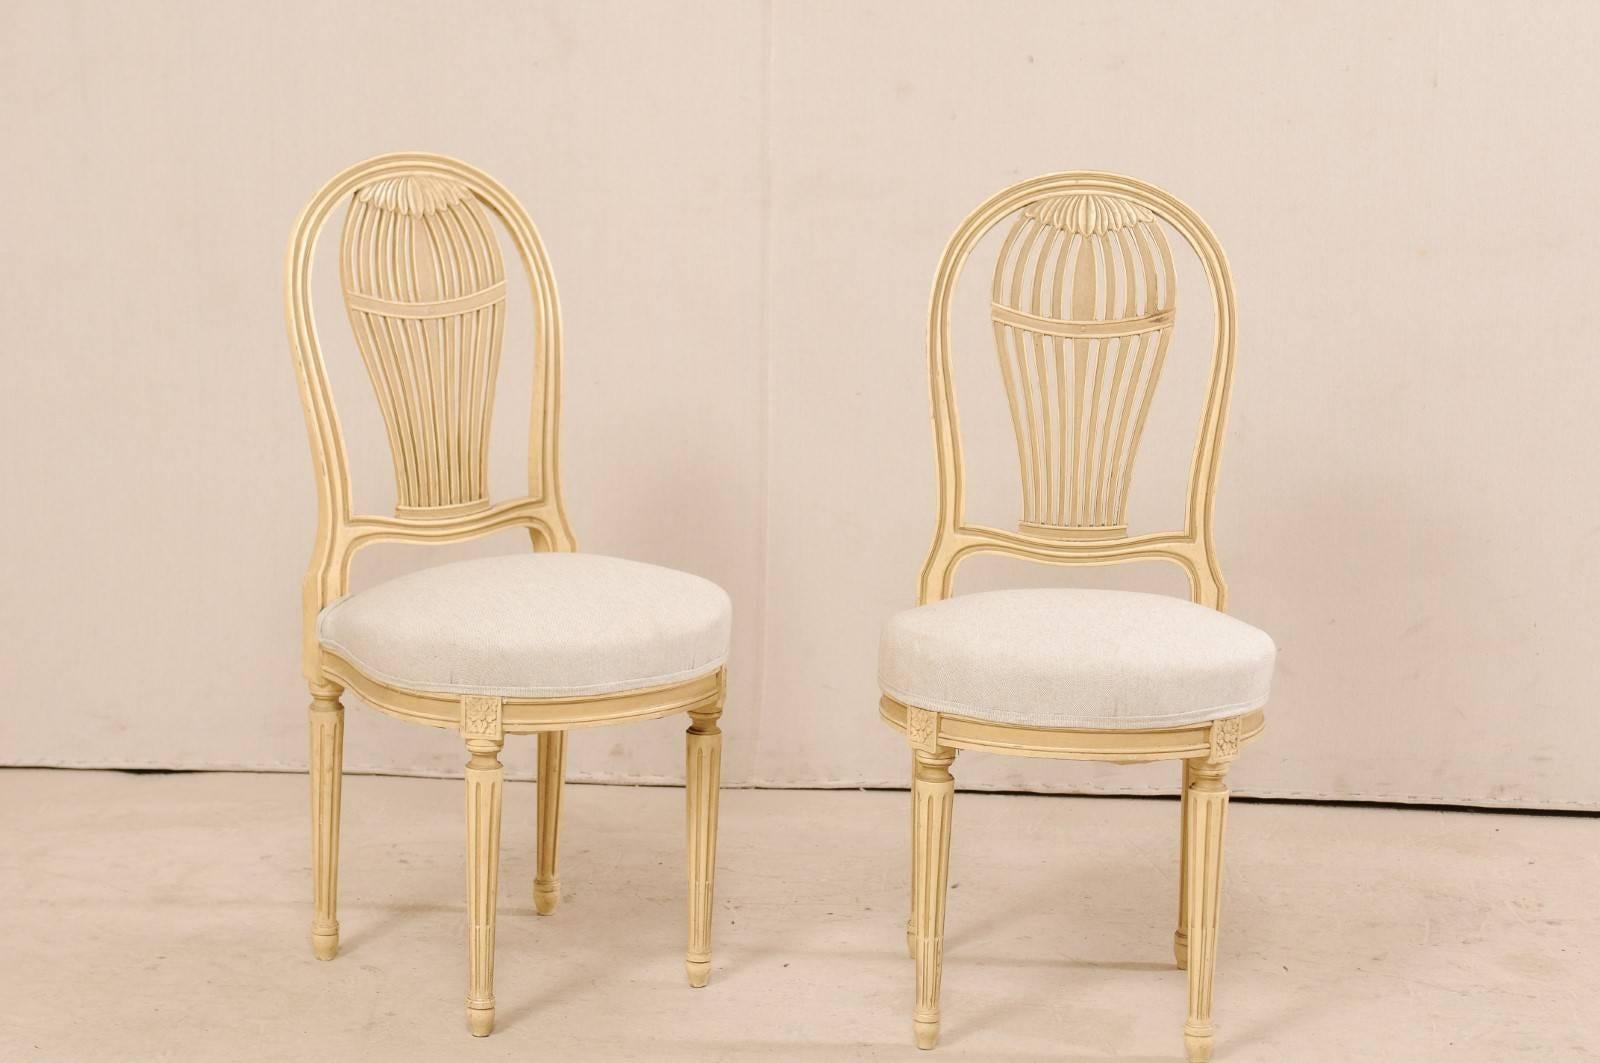 A set of four French Louis XVI style painted wood and upholstered side chairs from the mid-20th century. This set of vintage French chairs feature beautiful balloon backs, reminiscent of 18th century hot air balloons, rounded front skirts with